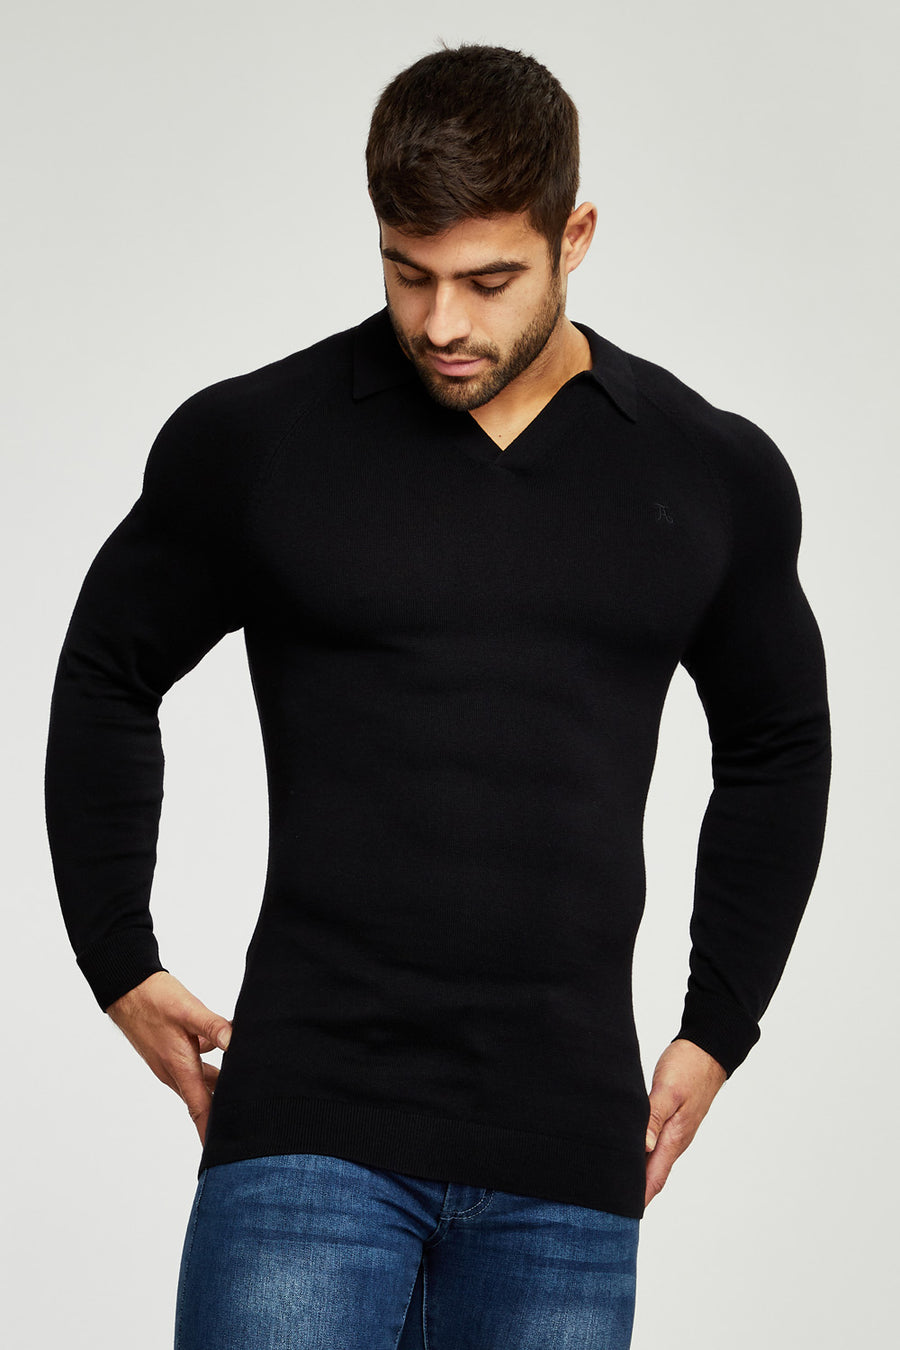 Athletic Fit Polo Shirts - Tailored Athlete - TAILORED ATHLETE